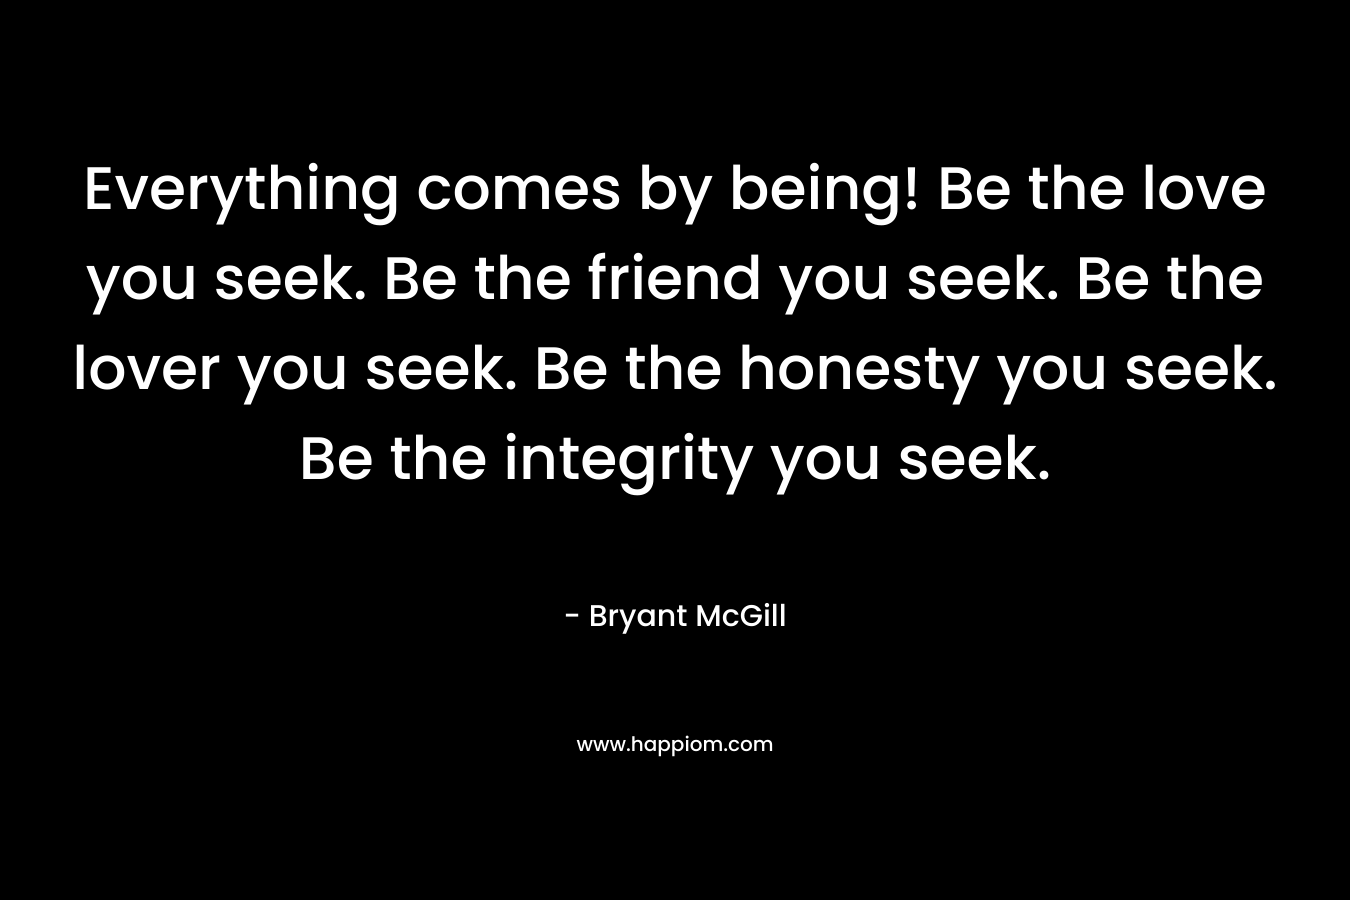 Everything comes by being! Be the love you seek. Be the friend you seek. Be the lover you seek. Be the honesty you seek. Be the integrity you seek.